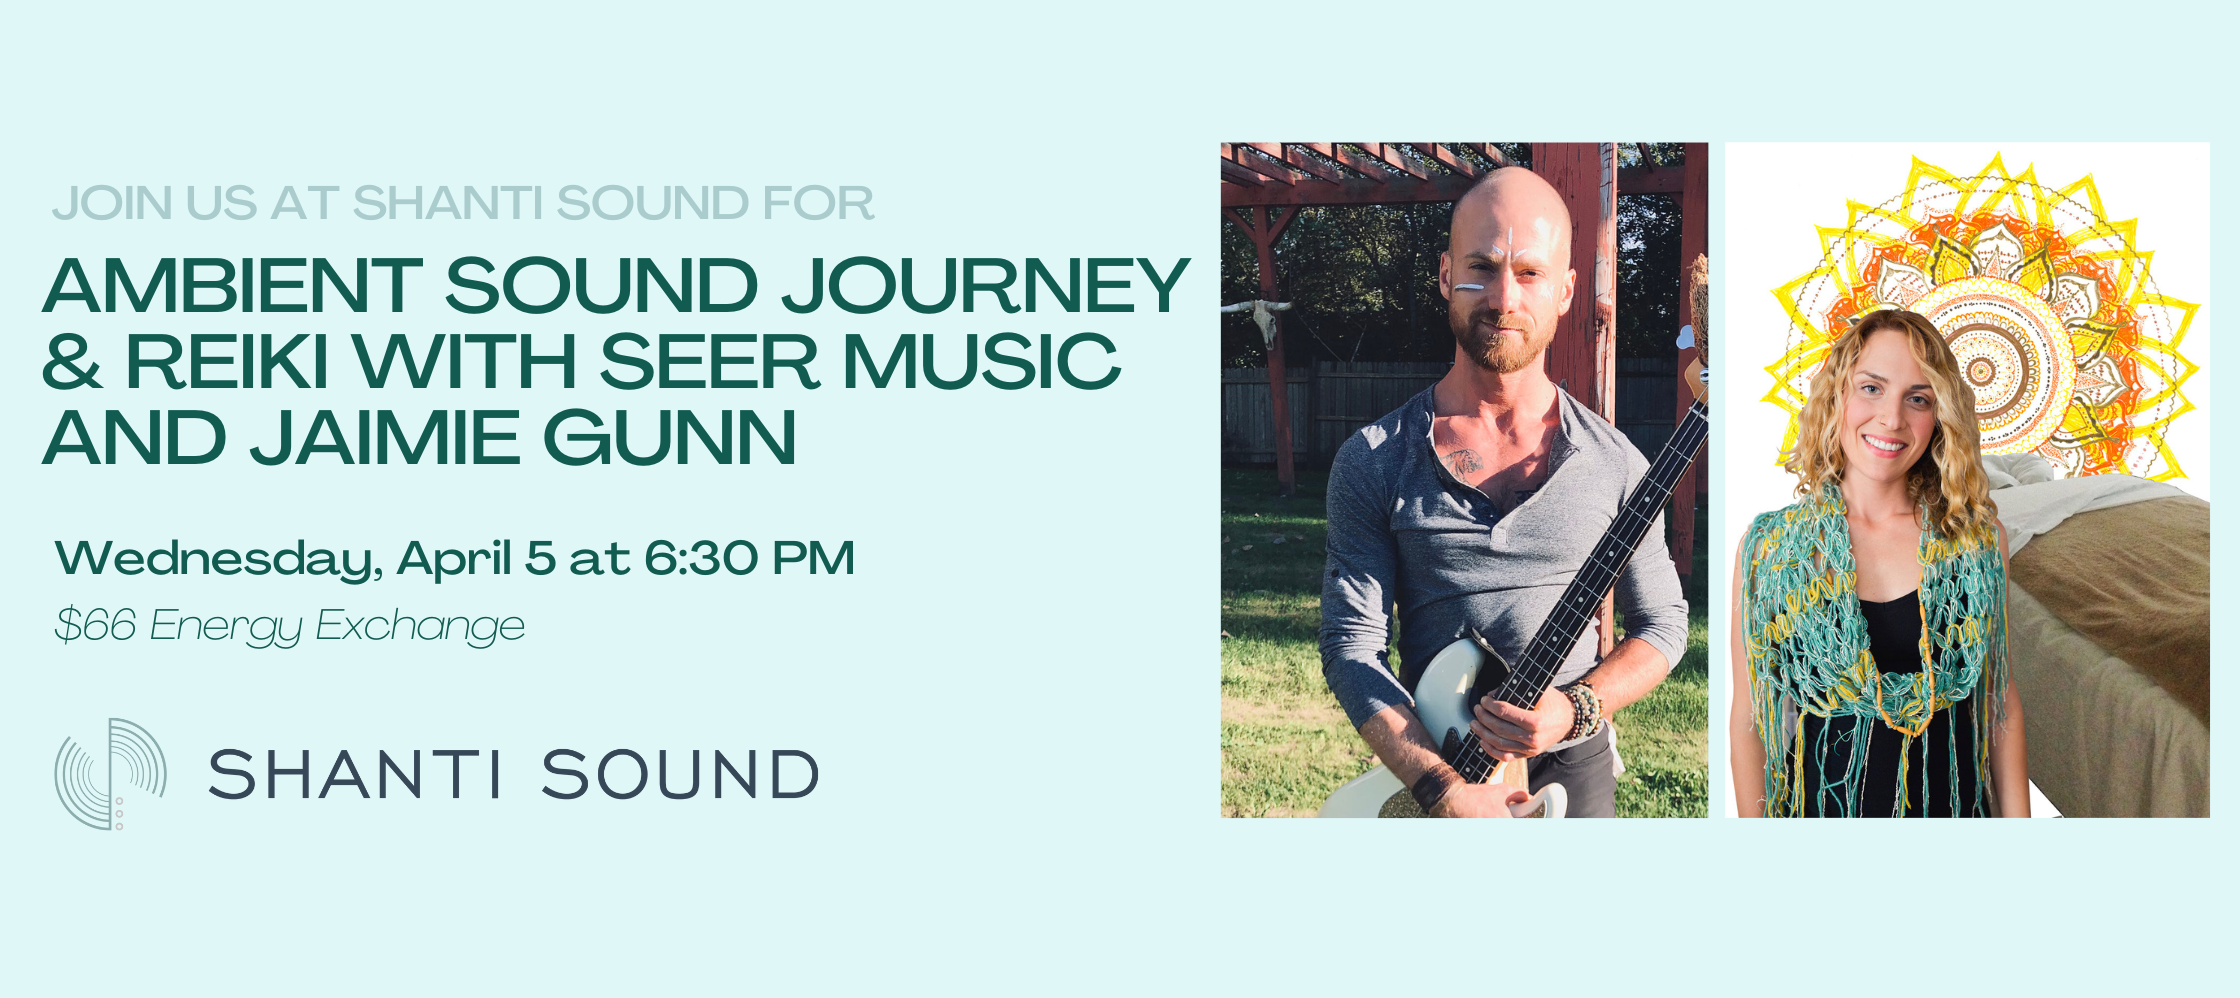 Featured image for “Ambient Sound Journey & Reiki with SEER MUSIC and Jaimie Gunn”